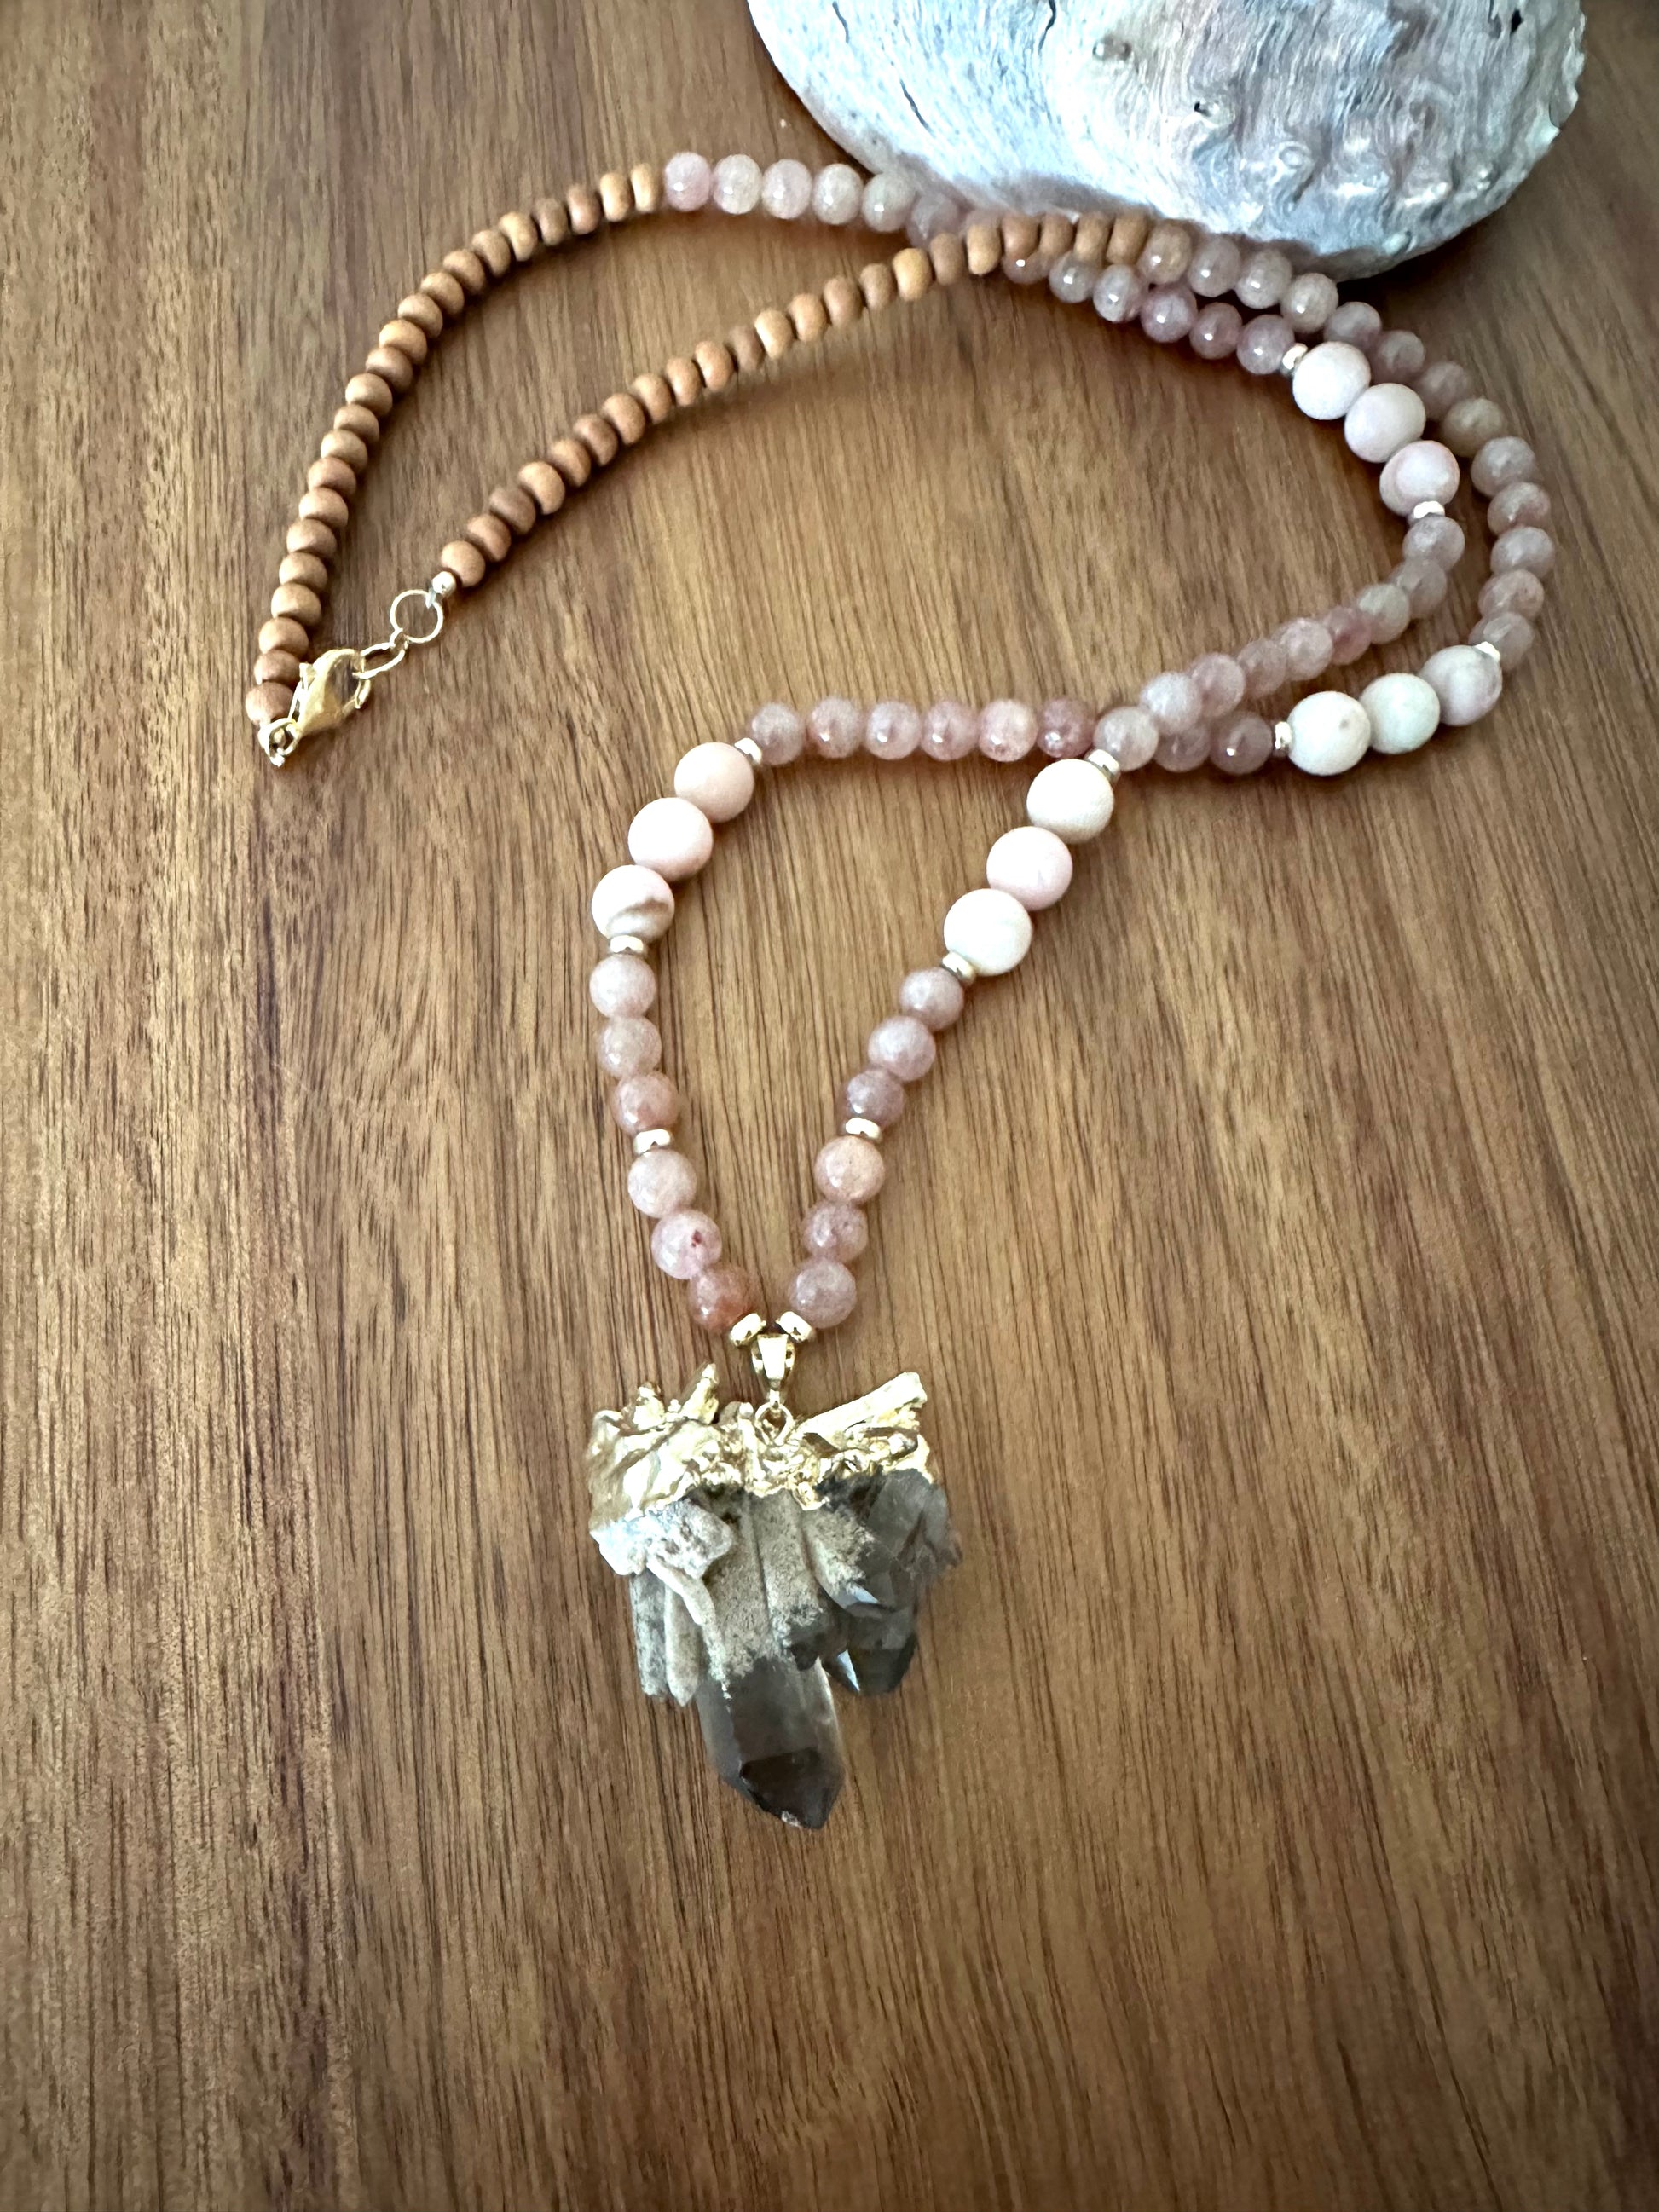 a necklace semi coiled up with pink stone beads, and wooden beads with a large smokey quartz pendant on a wooden board with an abalone shell in the background